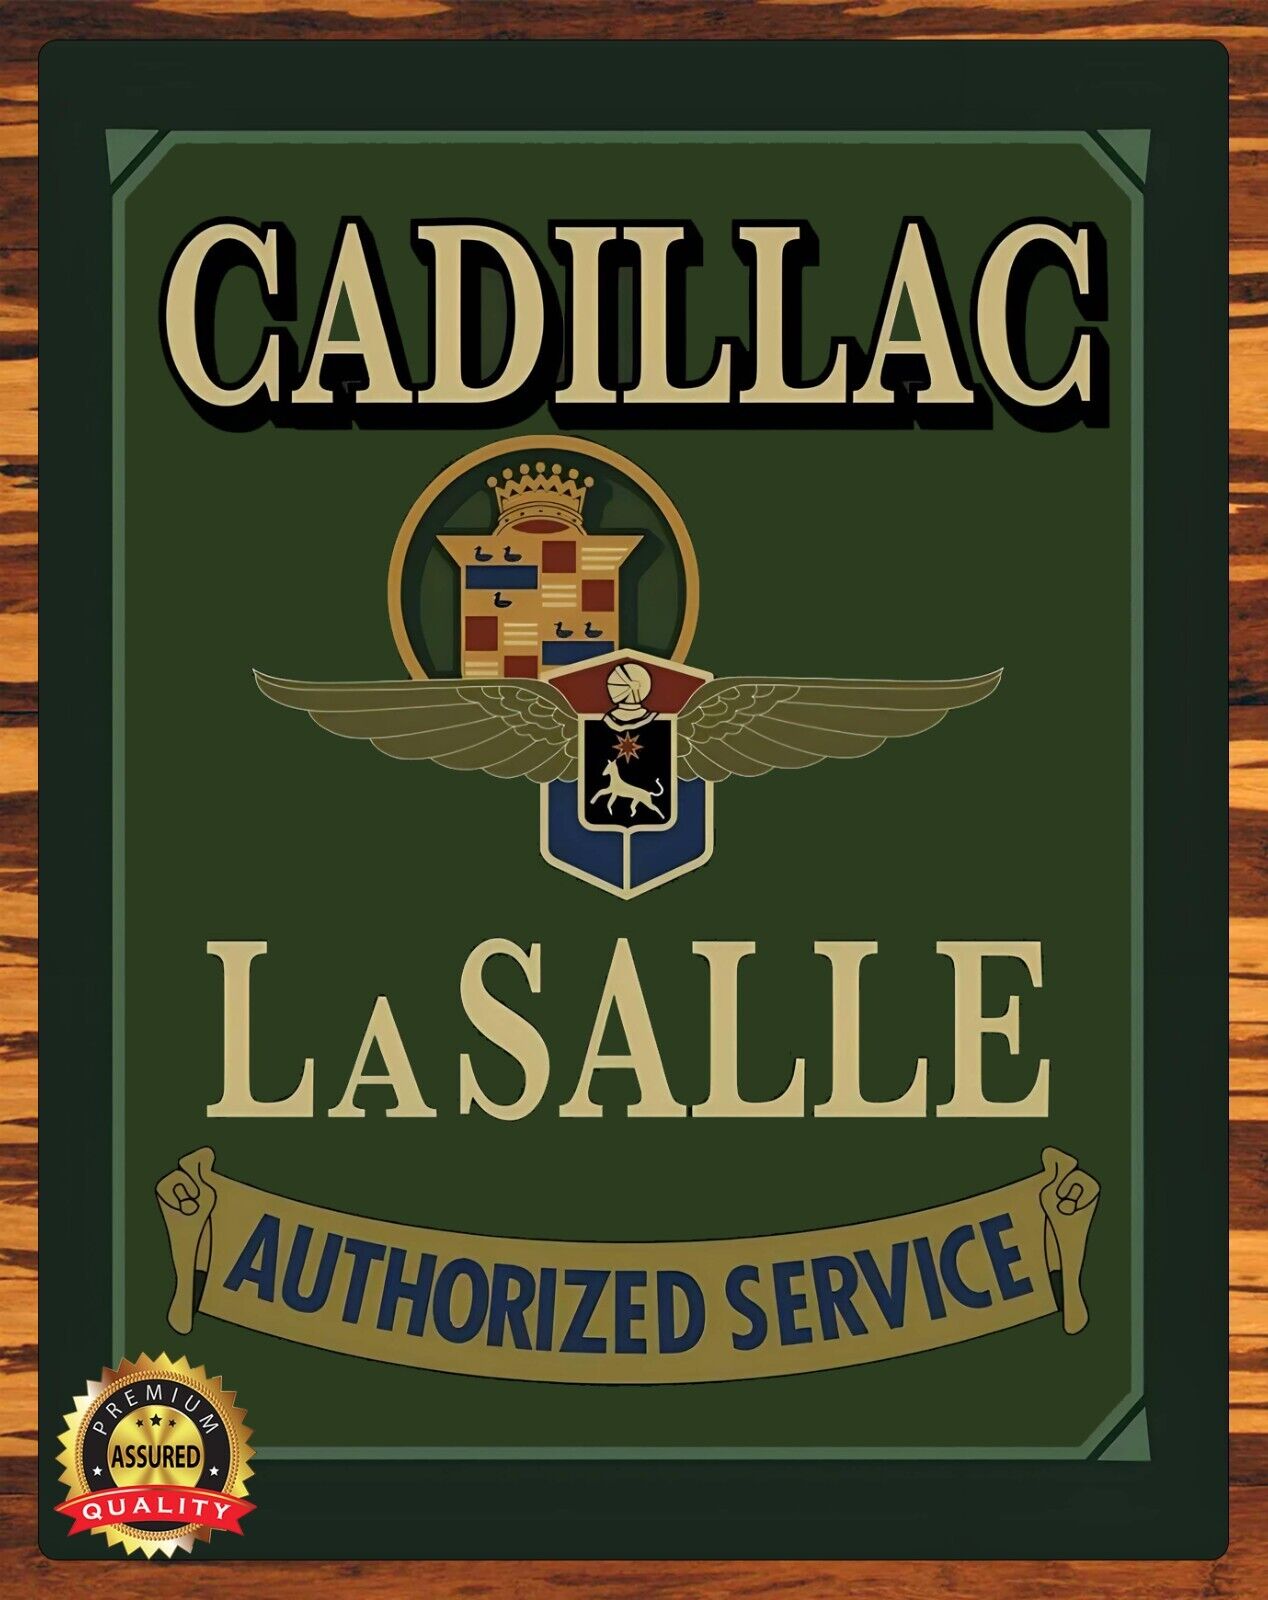 Cadillac - LaSalle - Authorized Service - Metal Sign 11 x 14